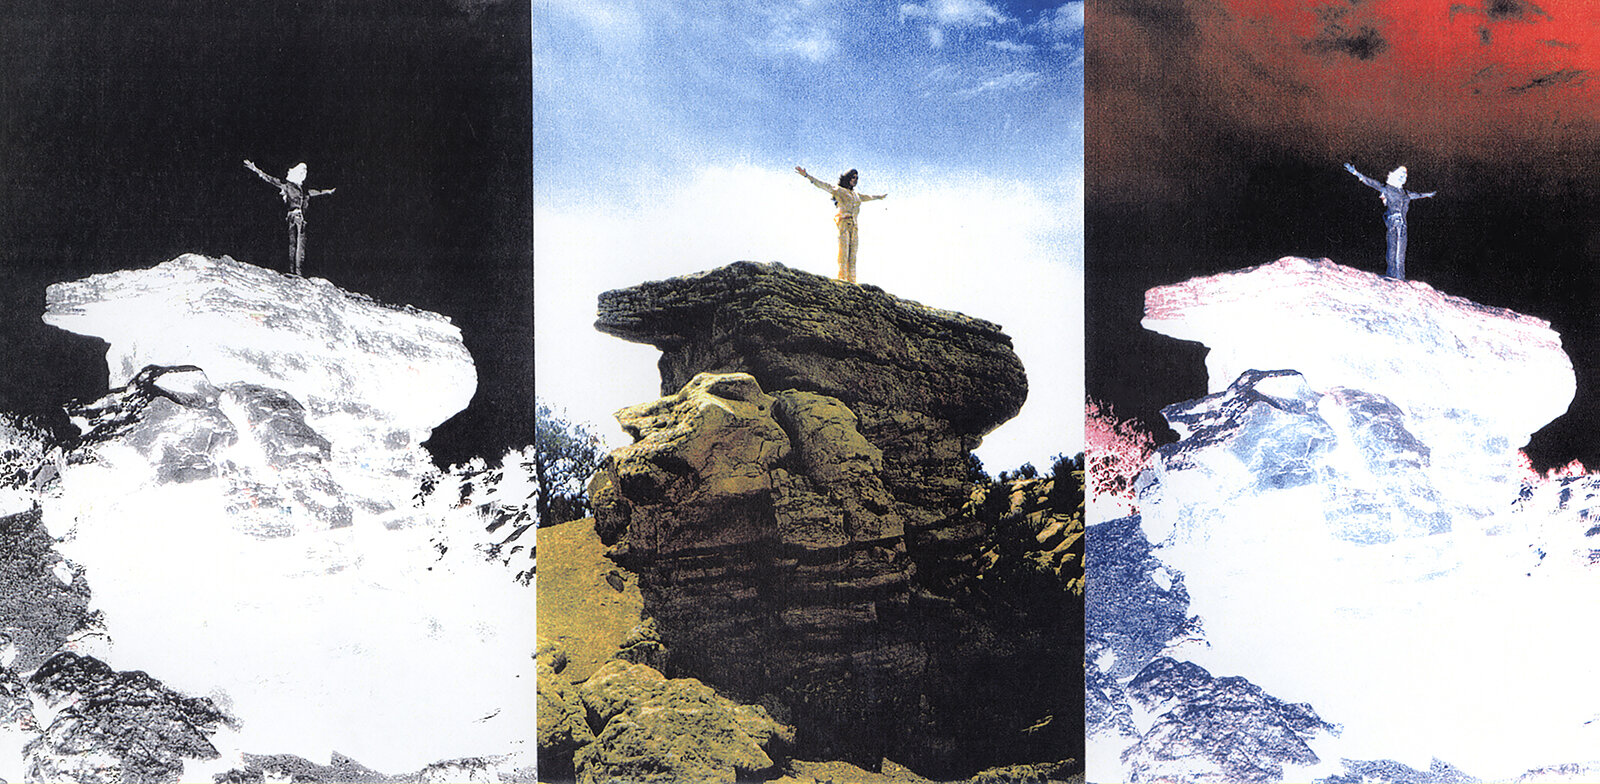 FLAG, HOPI JUMP PostCards to Teddy Roosevelt While Thinking of Yves Klein Series, 1995-96 Dawn DEDEAUX 300 1600pixWEB.jpg